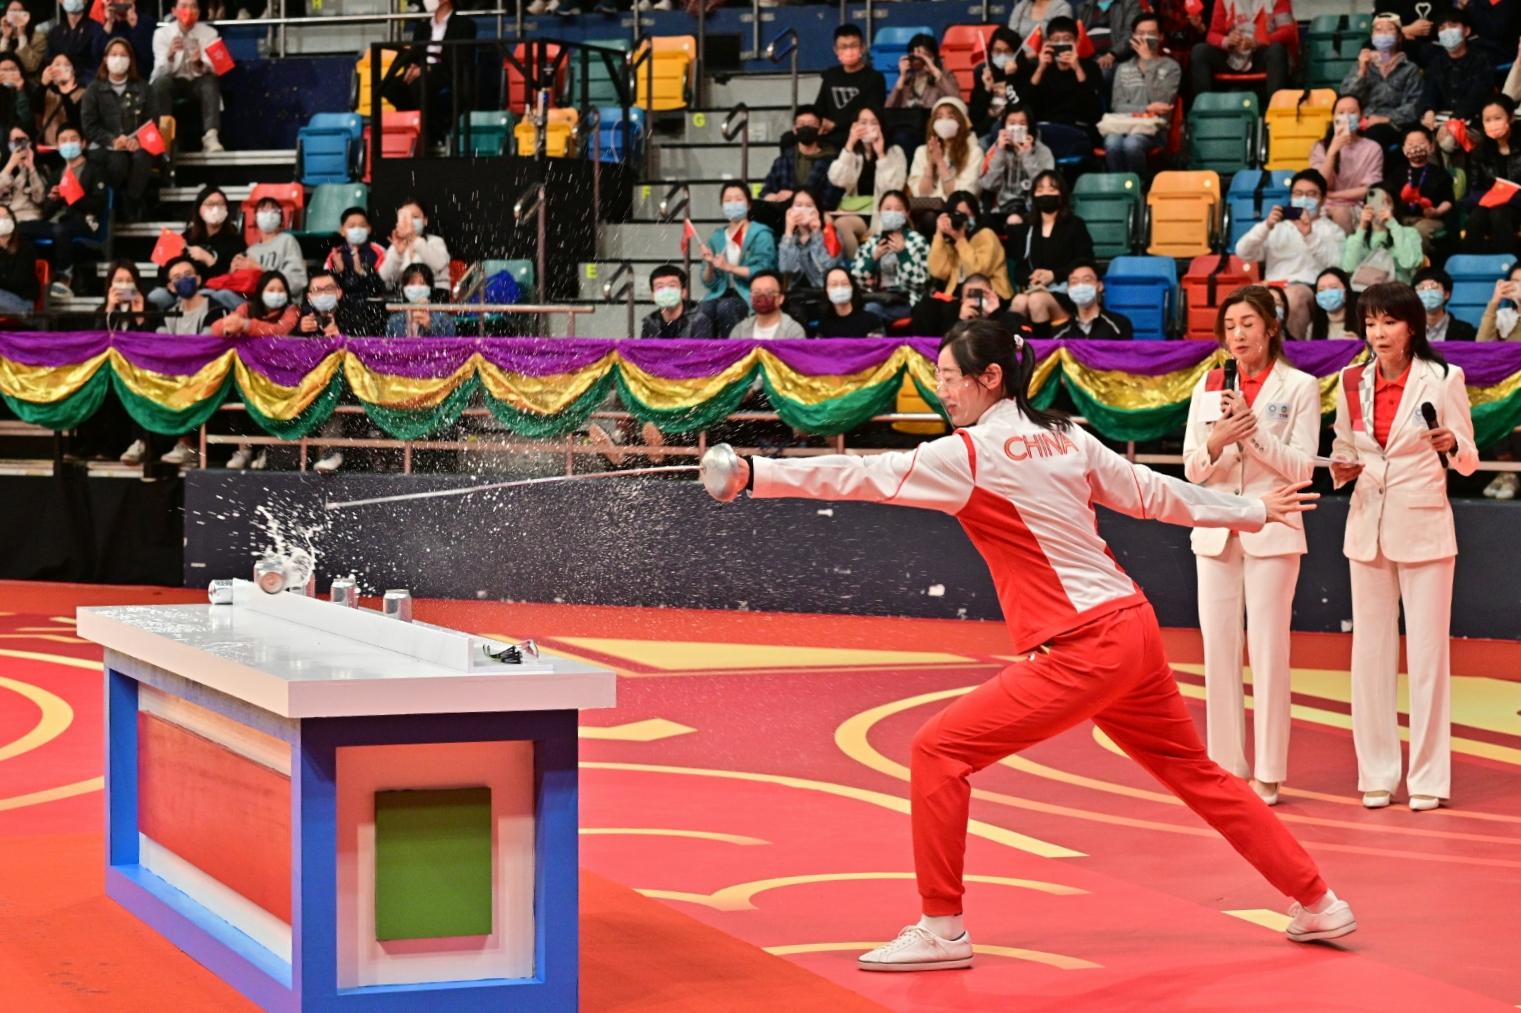 The delegation of Tokyo 2020 Olympic Games Mainland Olympians attended the "Mainland Olympians Variety Show" at Queen Elizabeth Stadium in Wan Chai this afternoon (December 4). Photo shows Mainland fencing athlete Sun Yiwen (left) taking part in a skill contest.